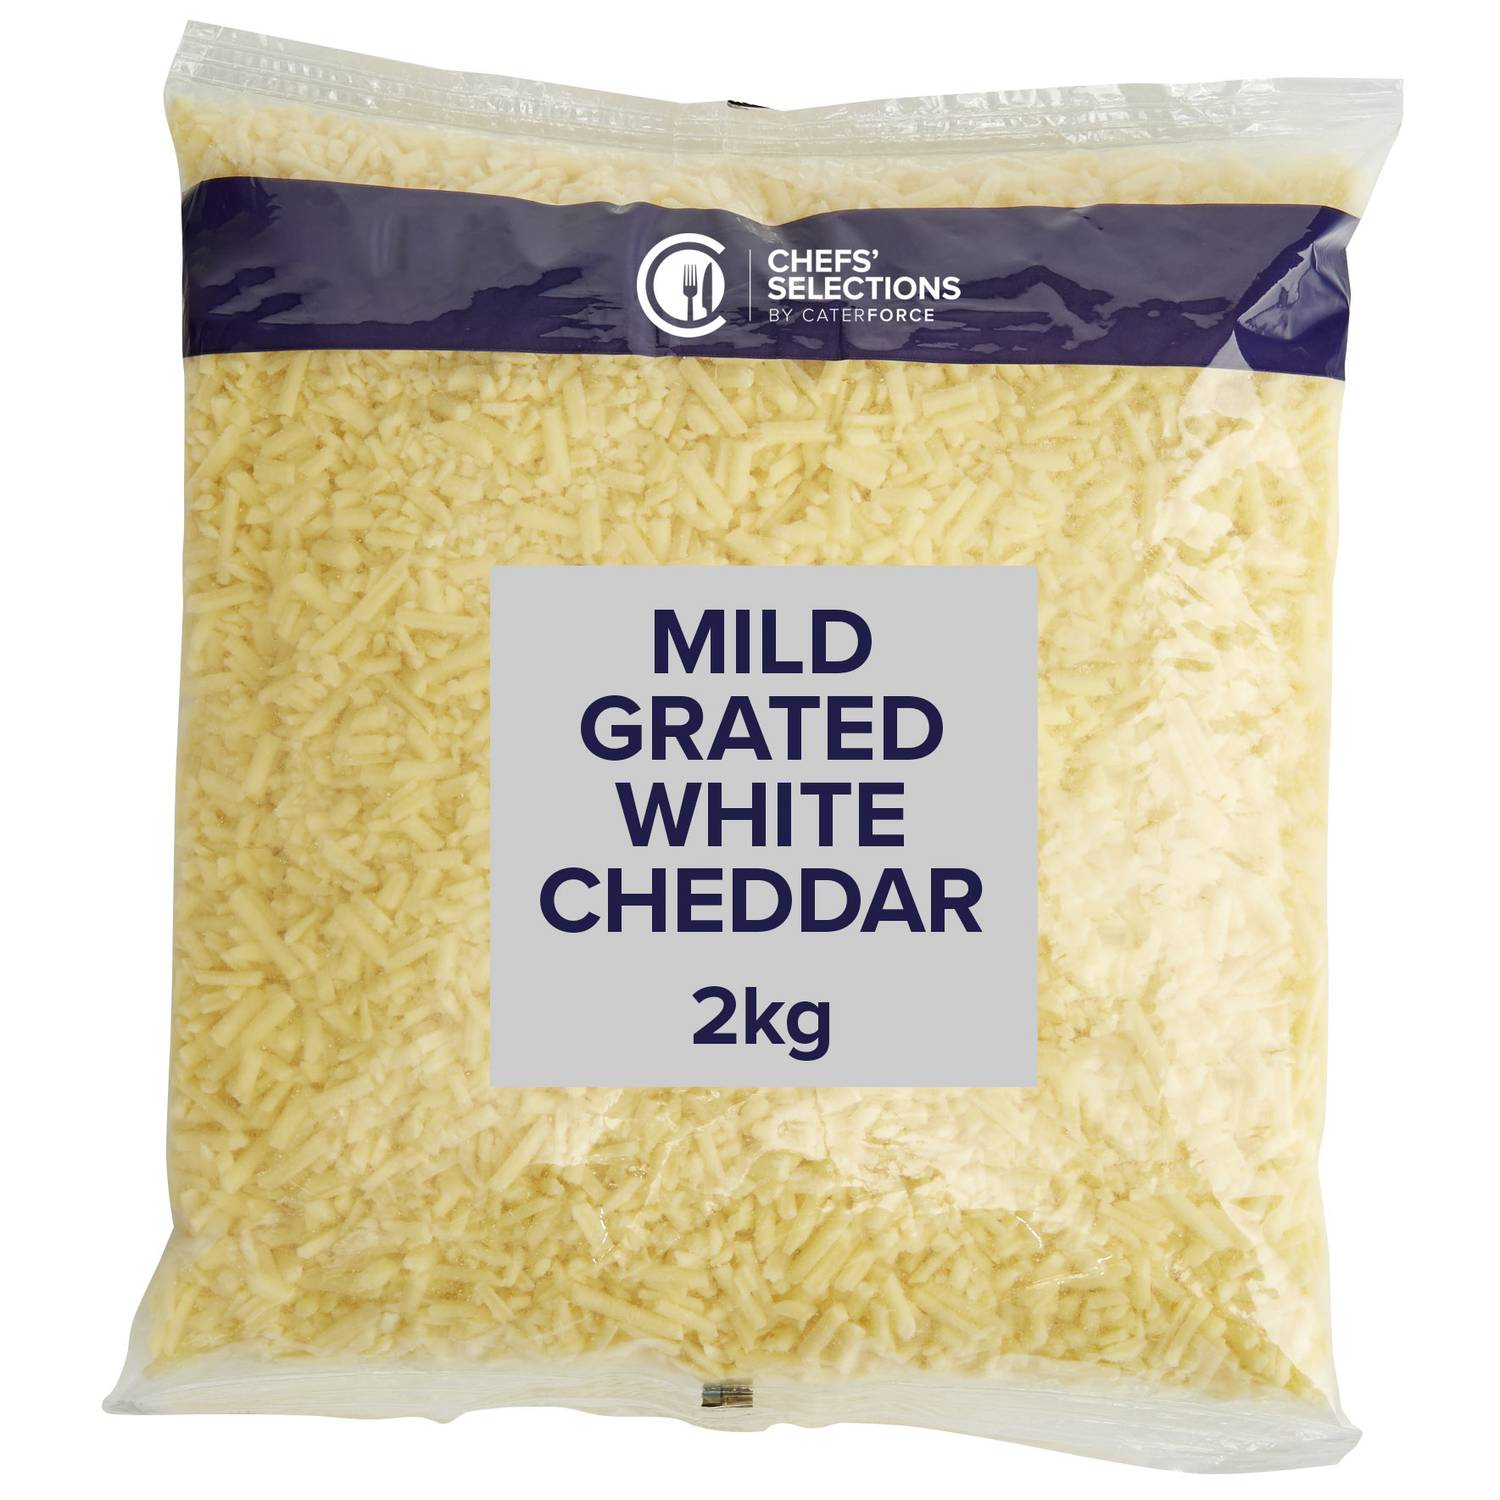 Chefs’ Selections Grated White Mild Cheddar 6 x 2kg